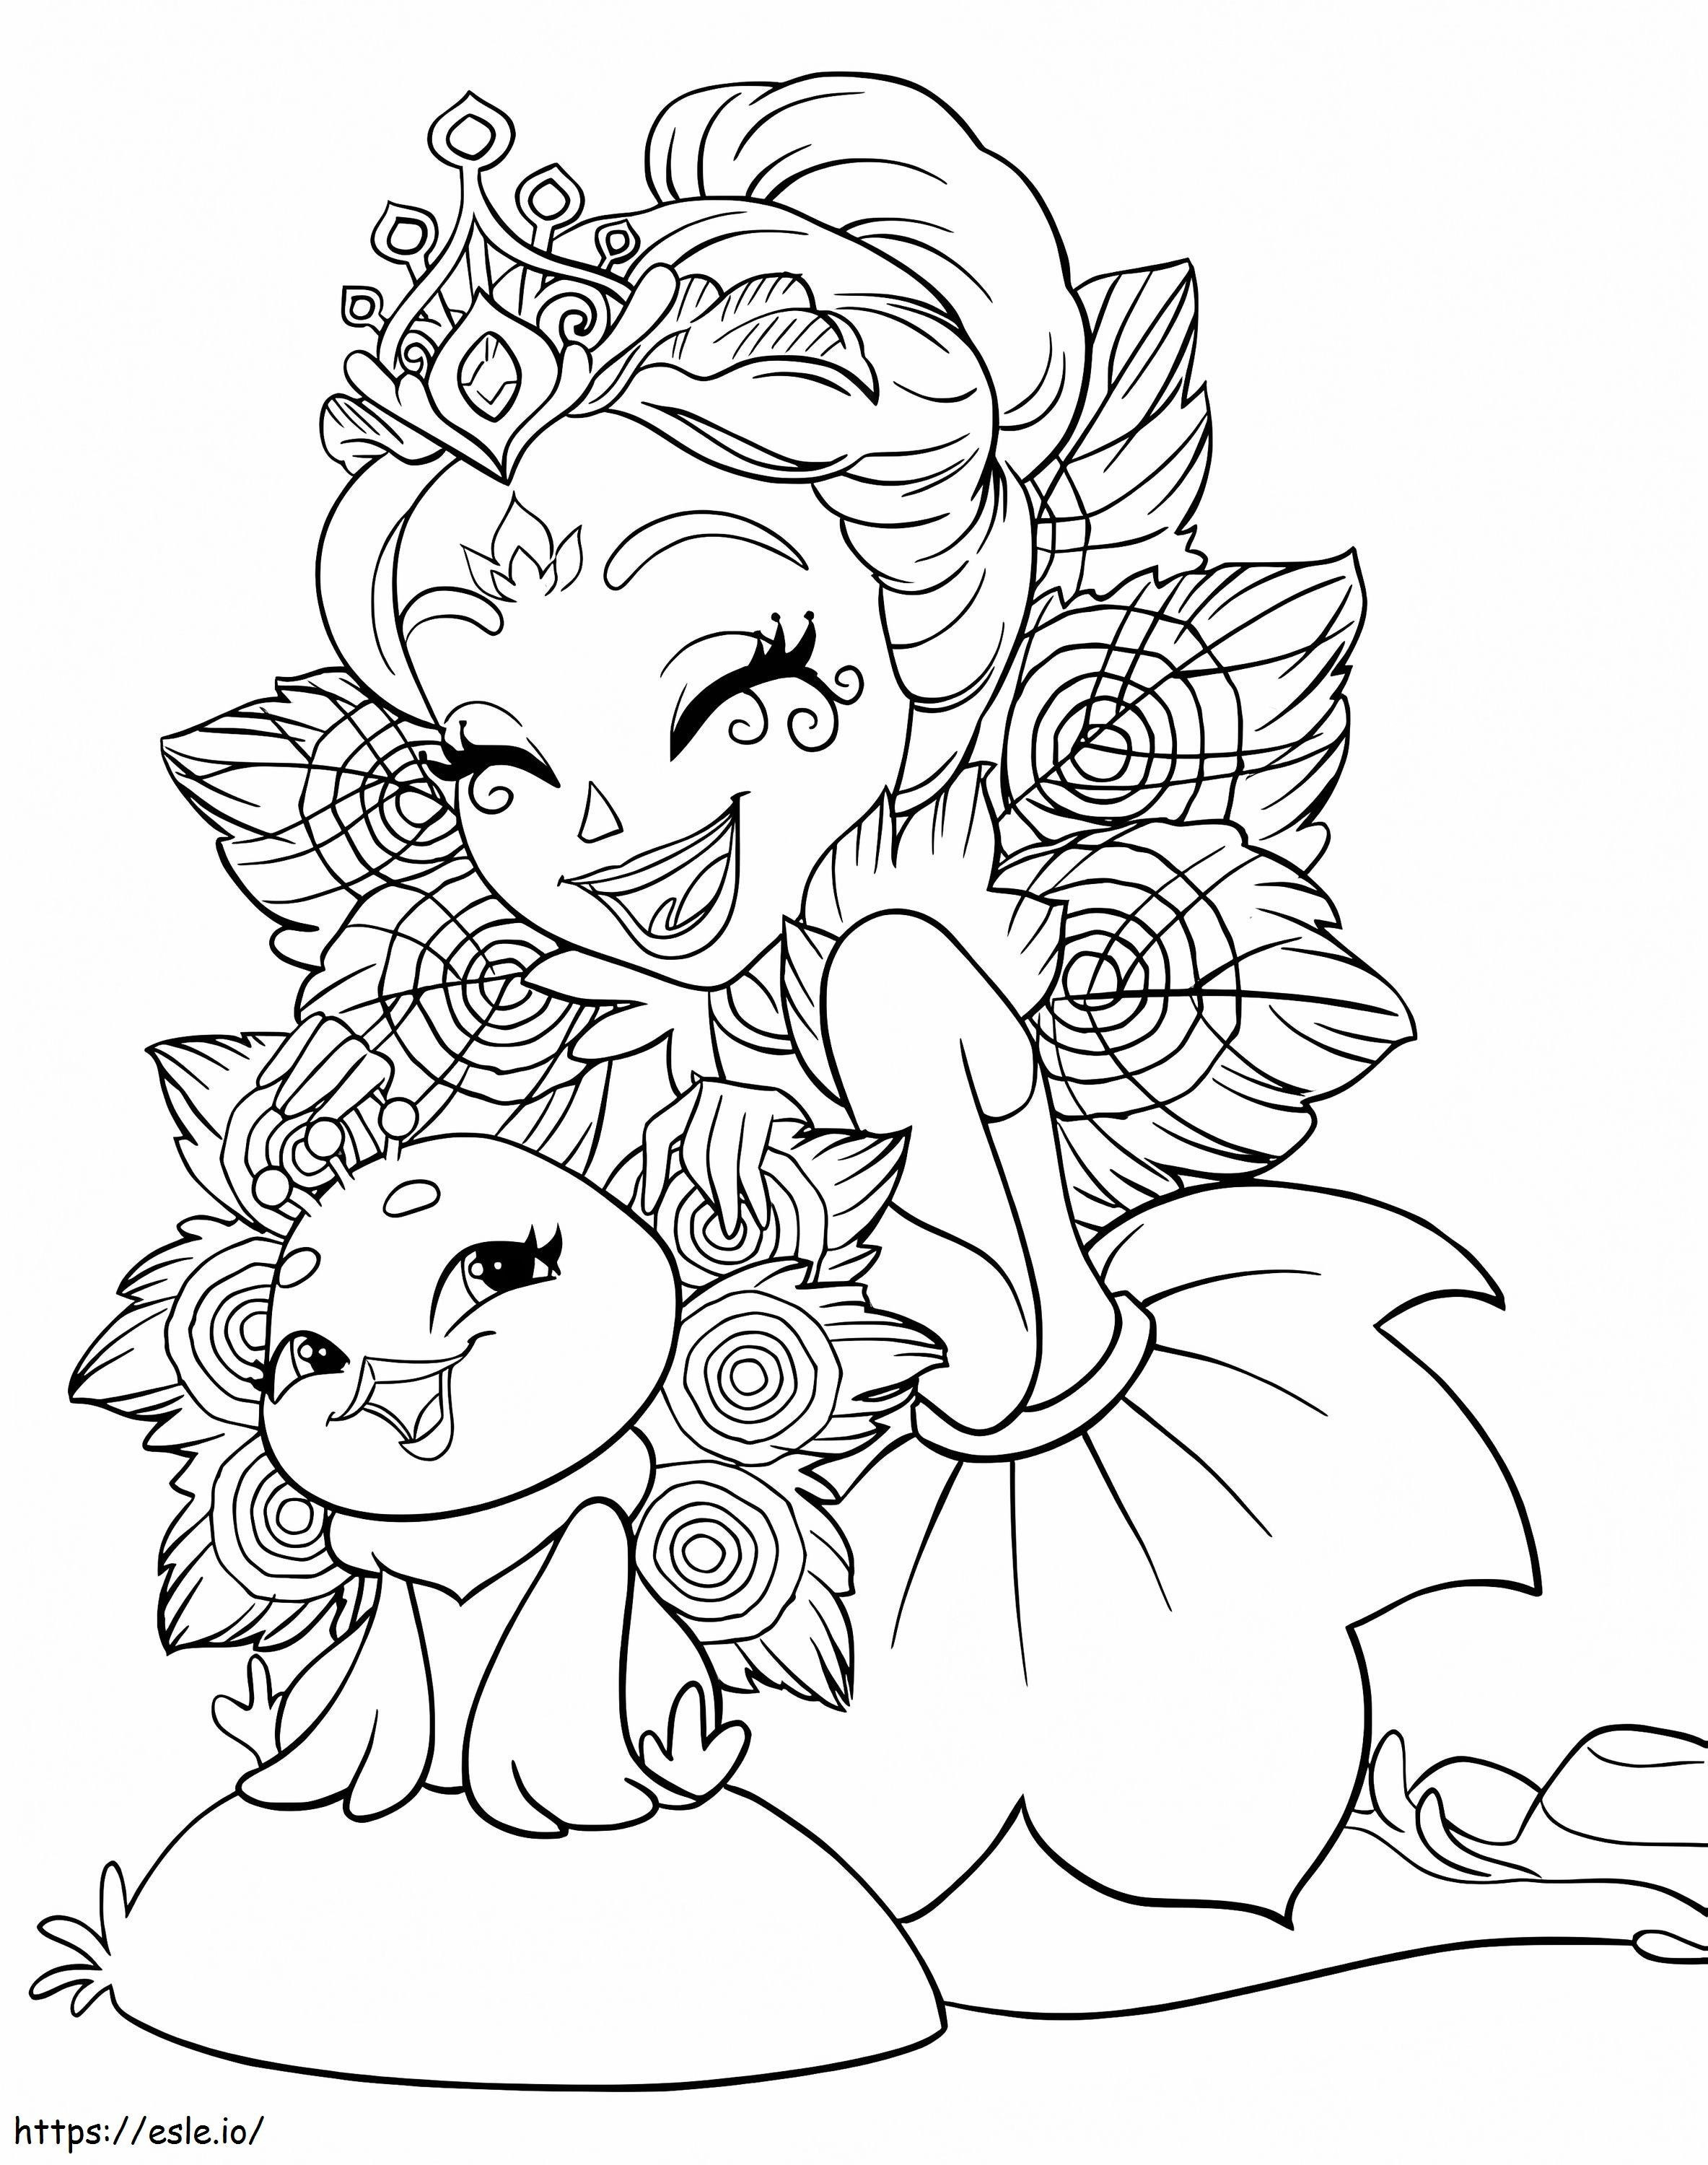 Patter Peacock From Enchantimals coloring page